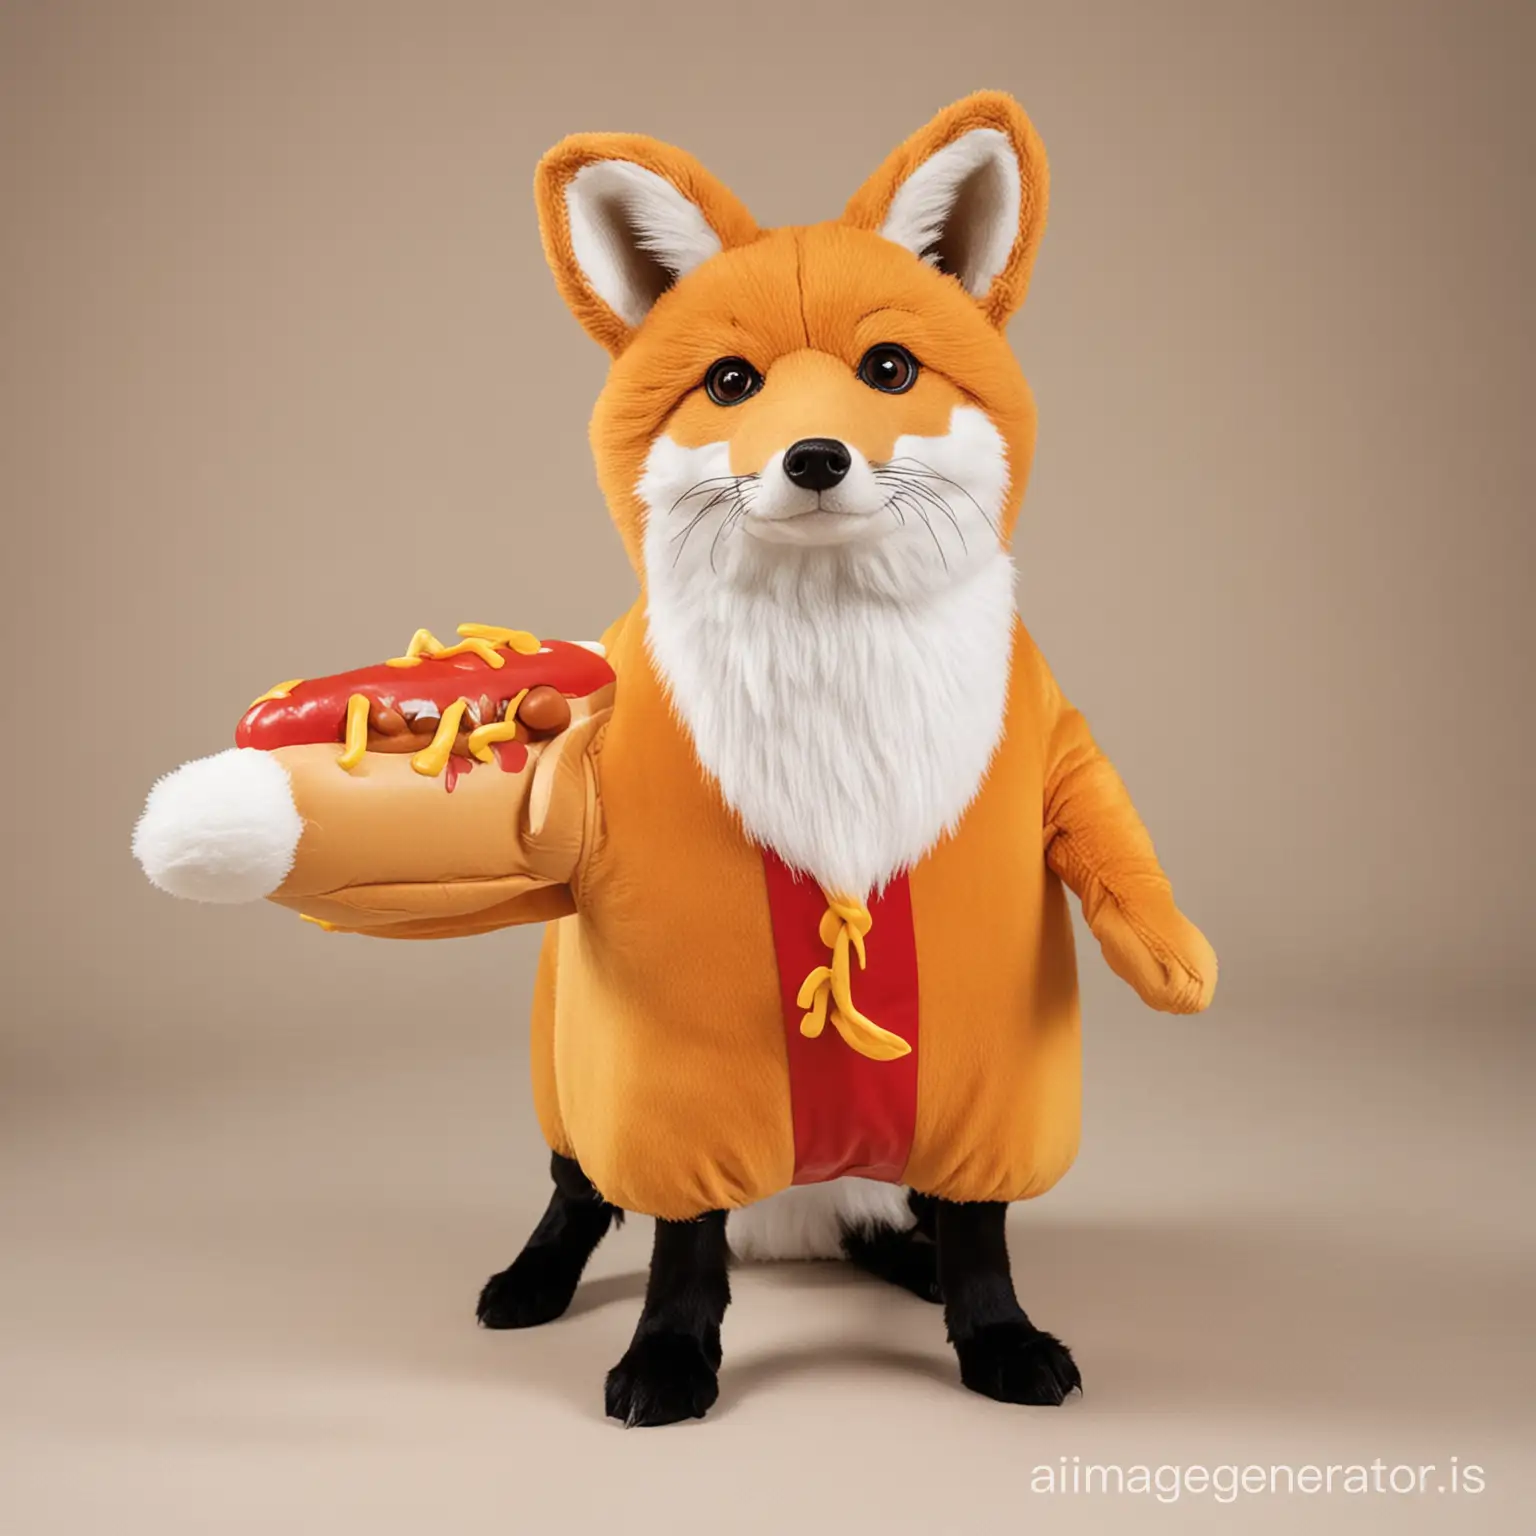 Cute-Fox-Wearing-Hot-Dog-Costume-in-a-Whimsical-Forest-Setting